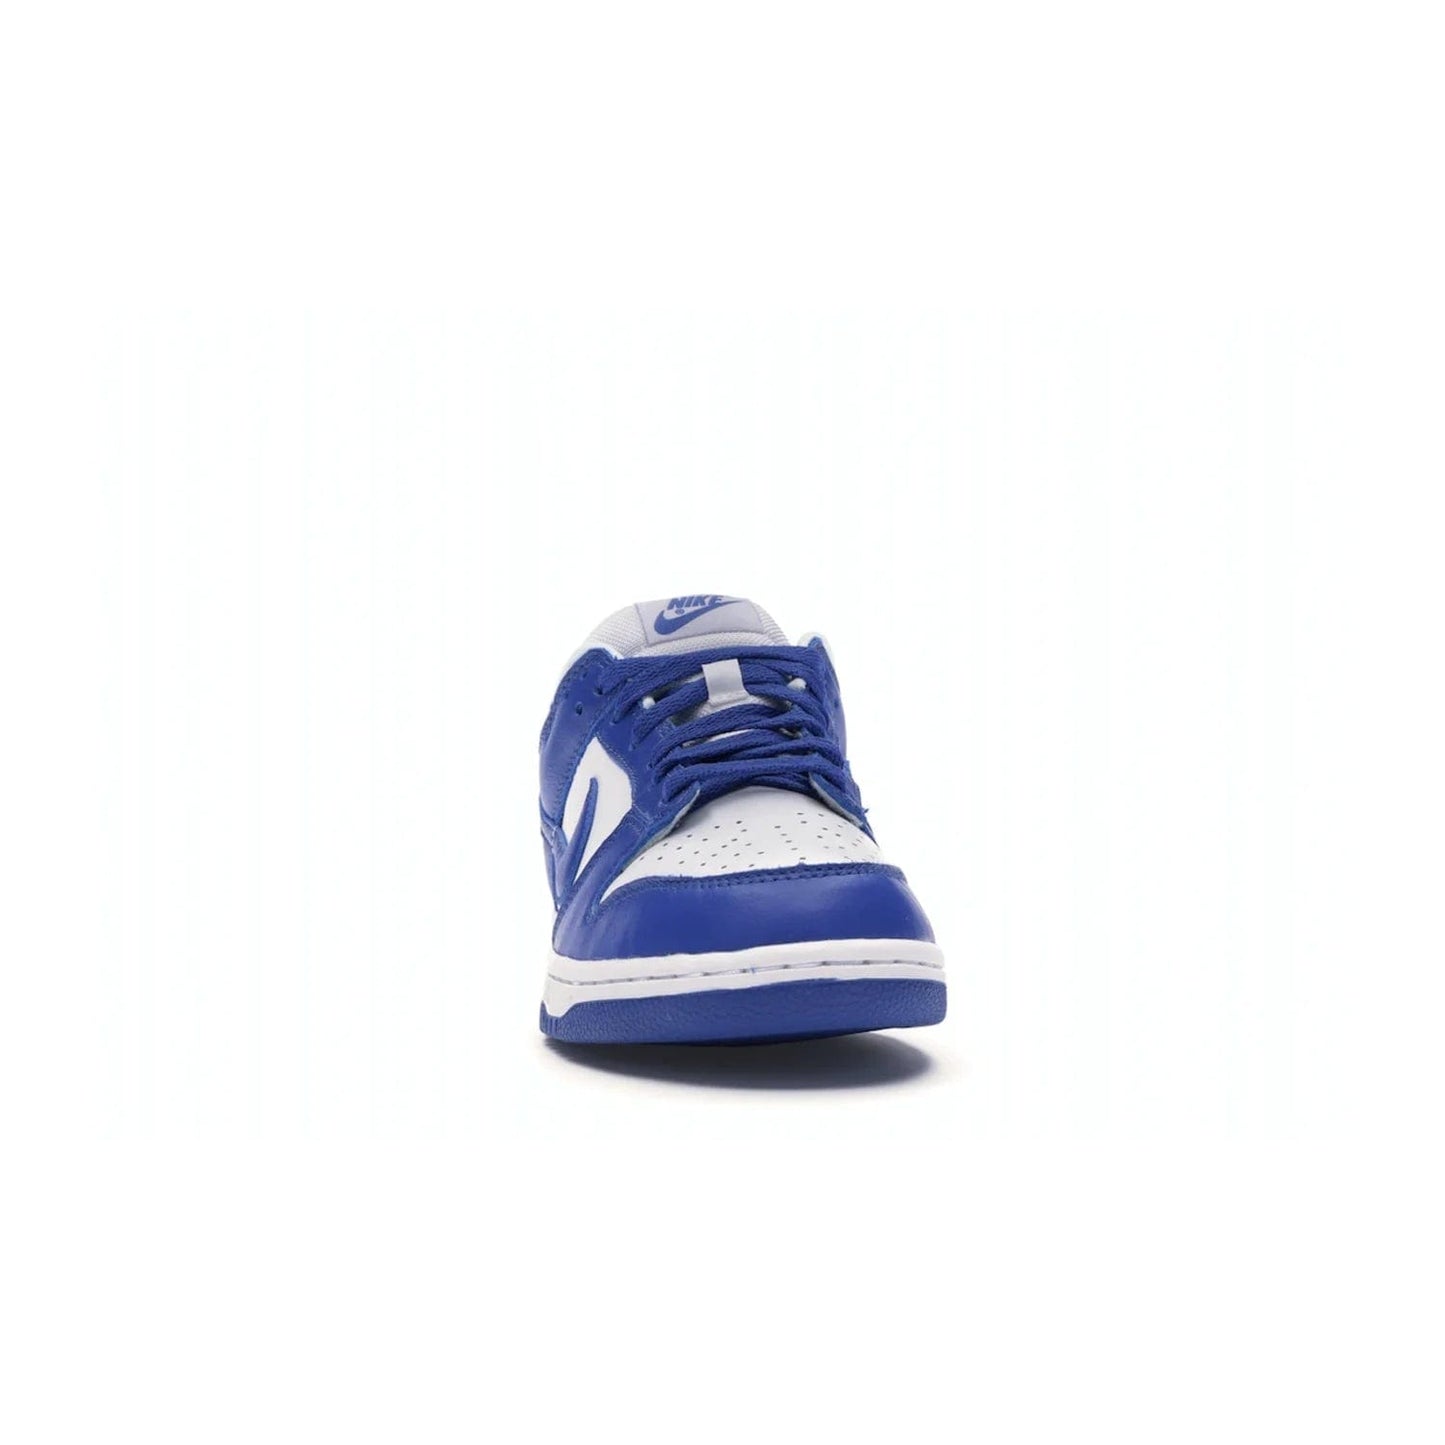 Nike Dunk Low SP Kentucky (2020/2022) - Image 9 - Only at www.BallersClubKickz.com - Classic Nike Dunk Low SP Kentucky with timeless White/Varsity Royal colorway. White leather upper, royal outsole, and Nike branding. A hit since March 2020 homage to the 1985 Nike College Colors program. Show your support with these classic kicks.